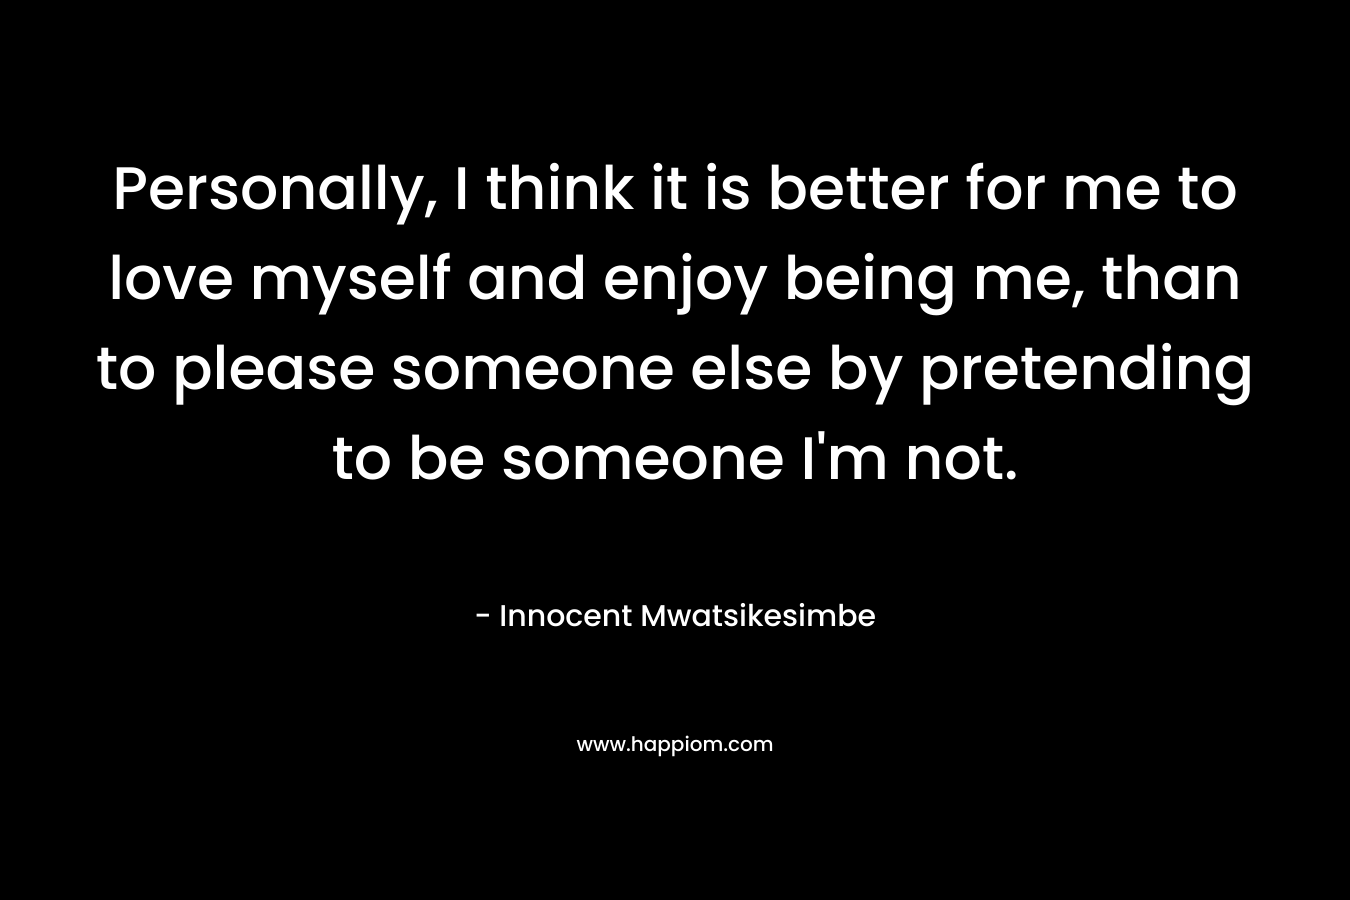 Personally, I think it is better for me to love myself and enjoy being me, than to please someone else by pretending to be someone I'm not.